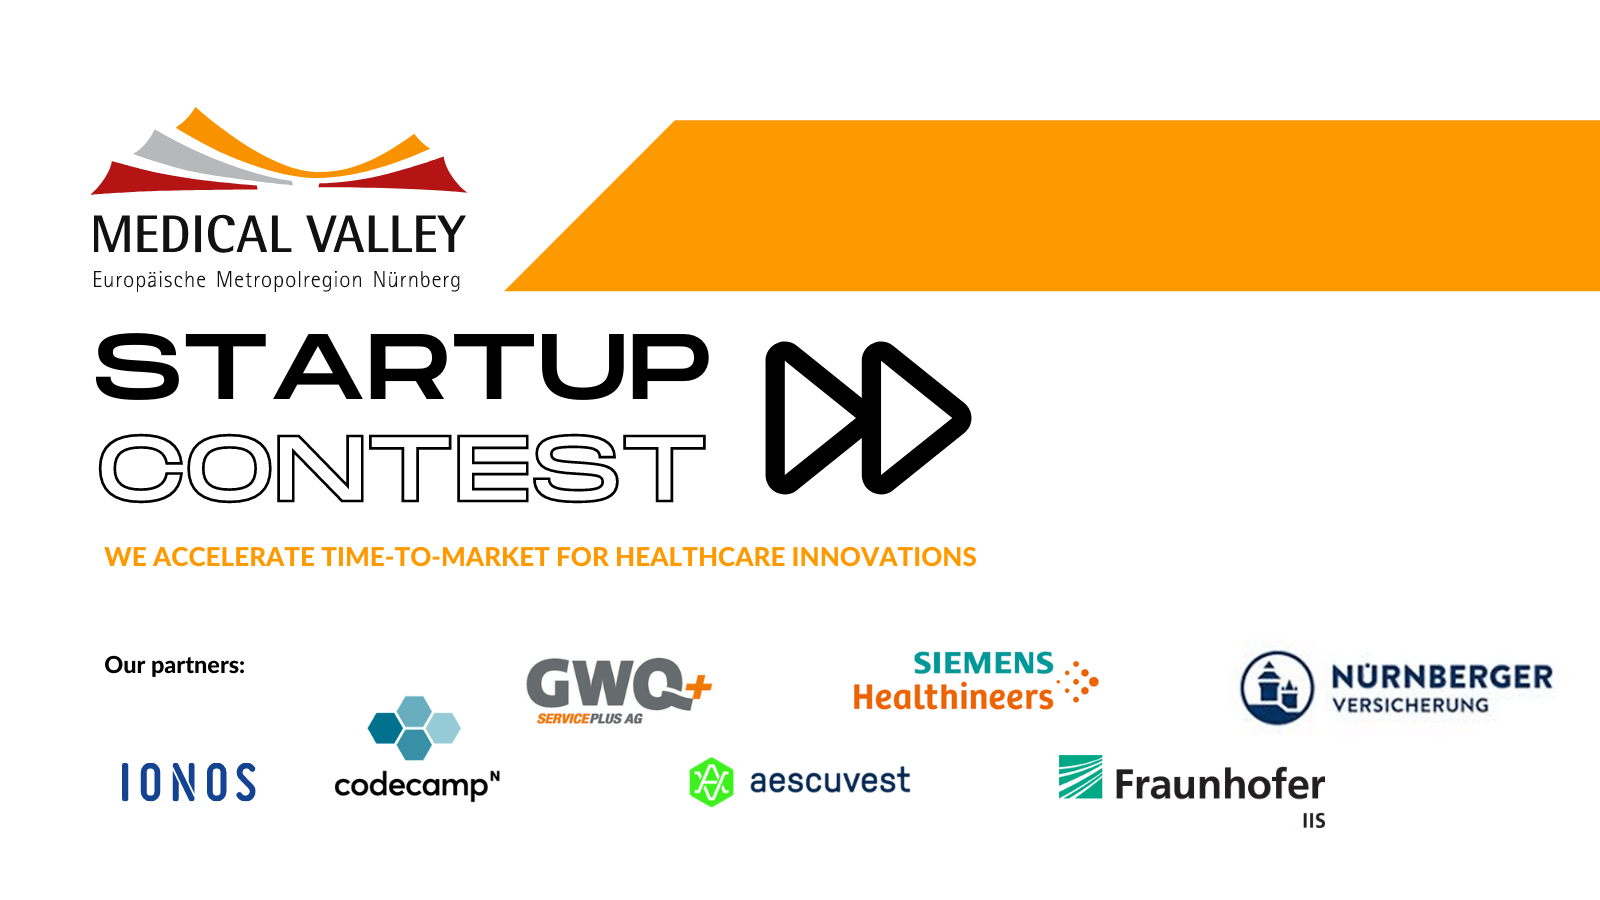 Medical Valley Startup Contest